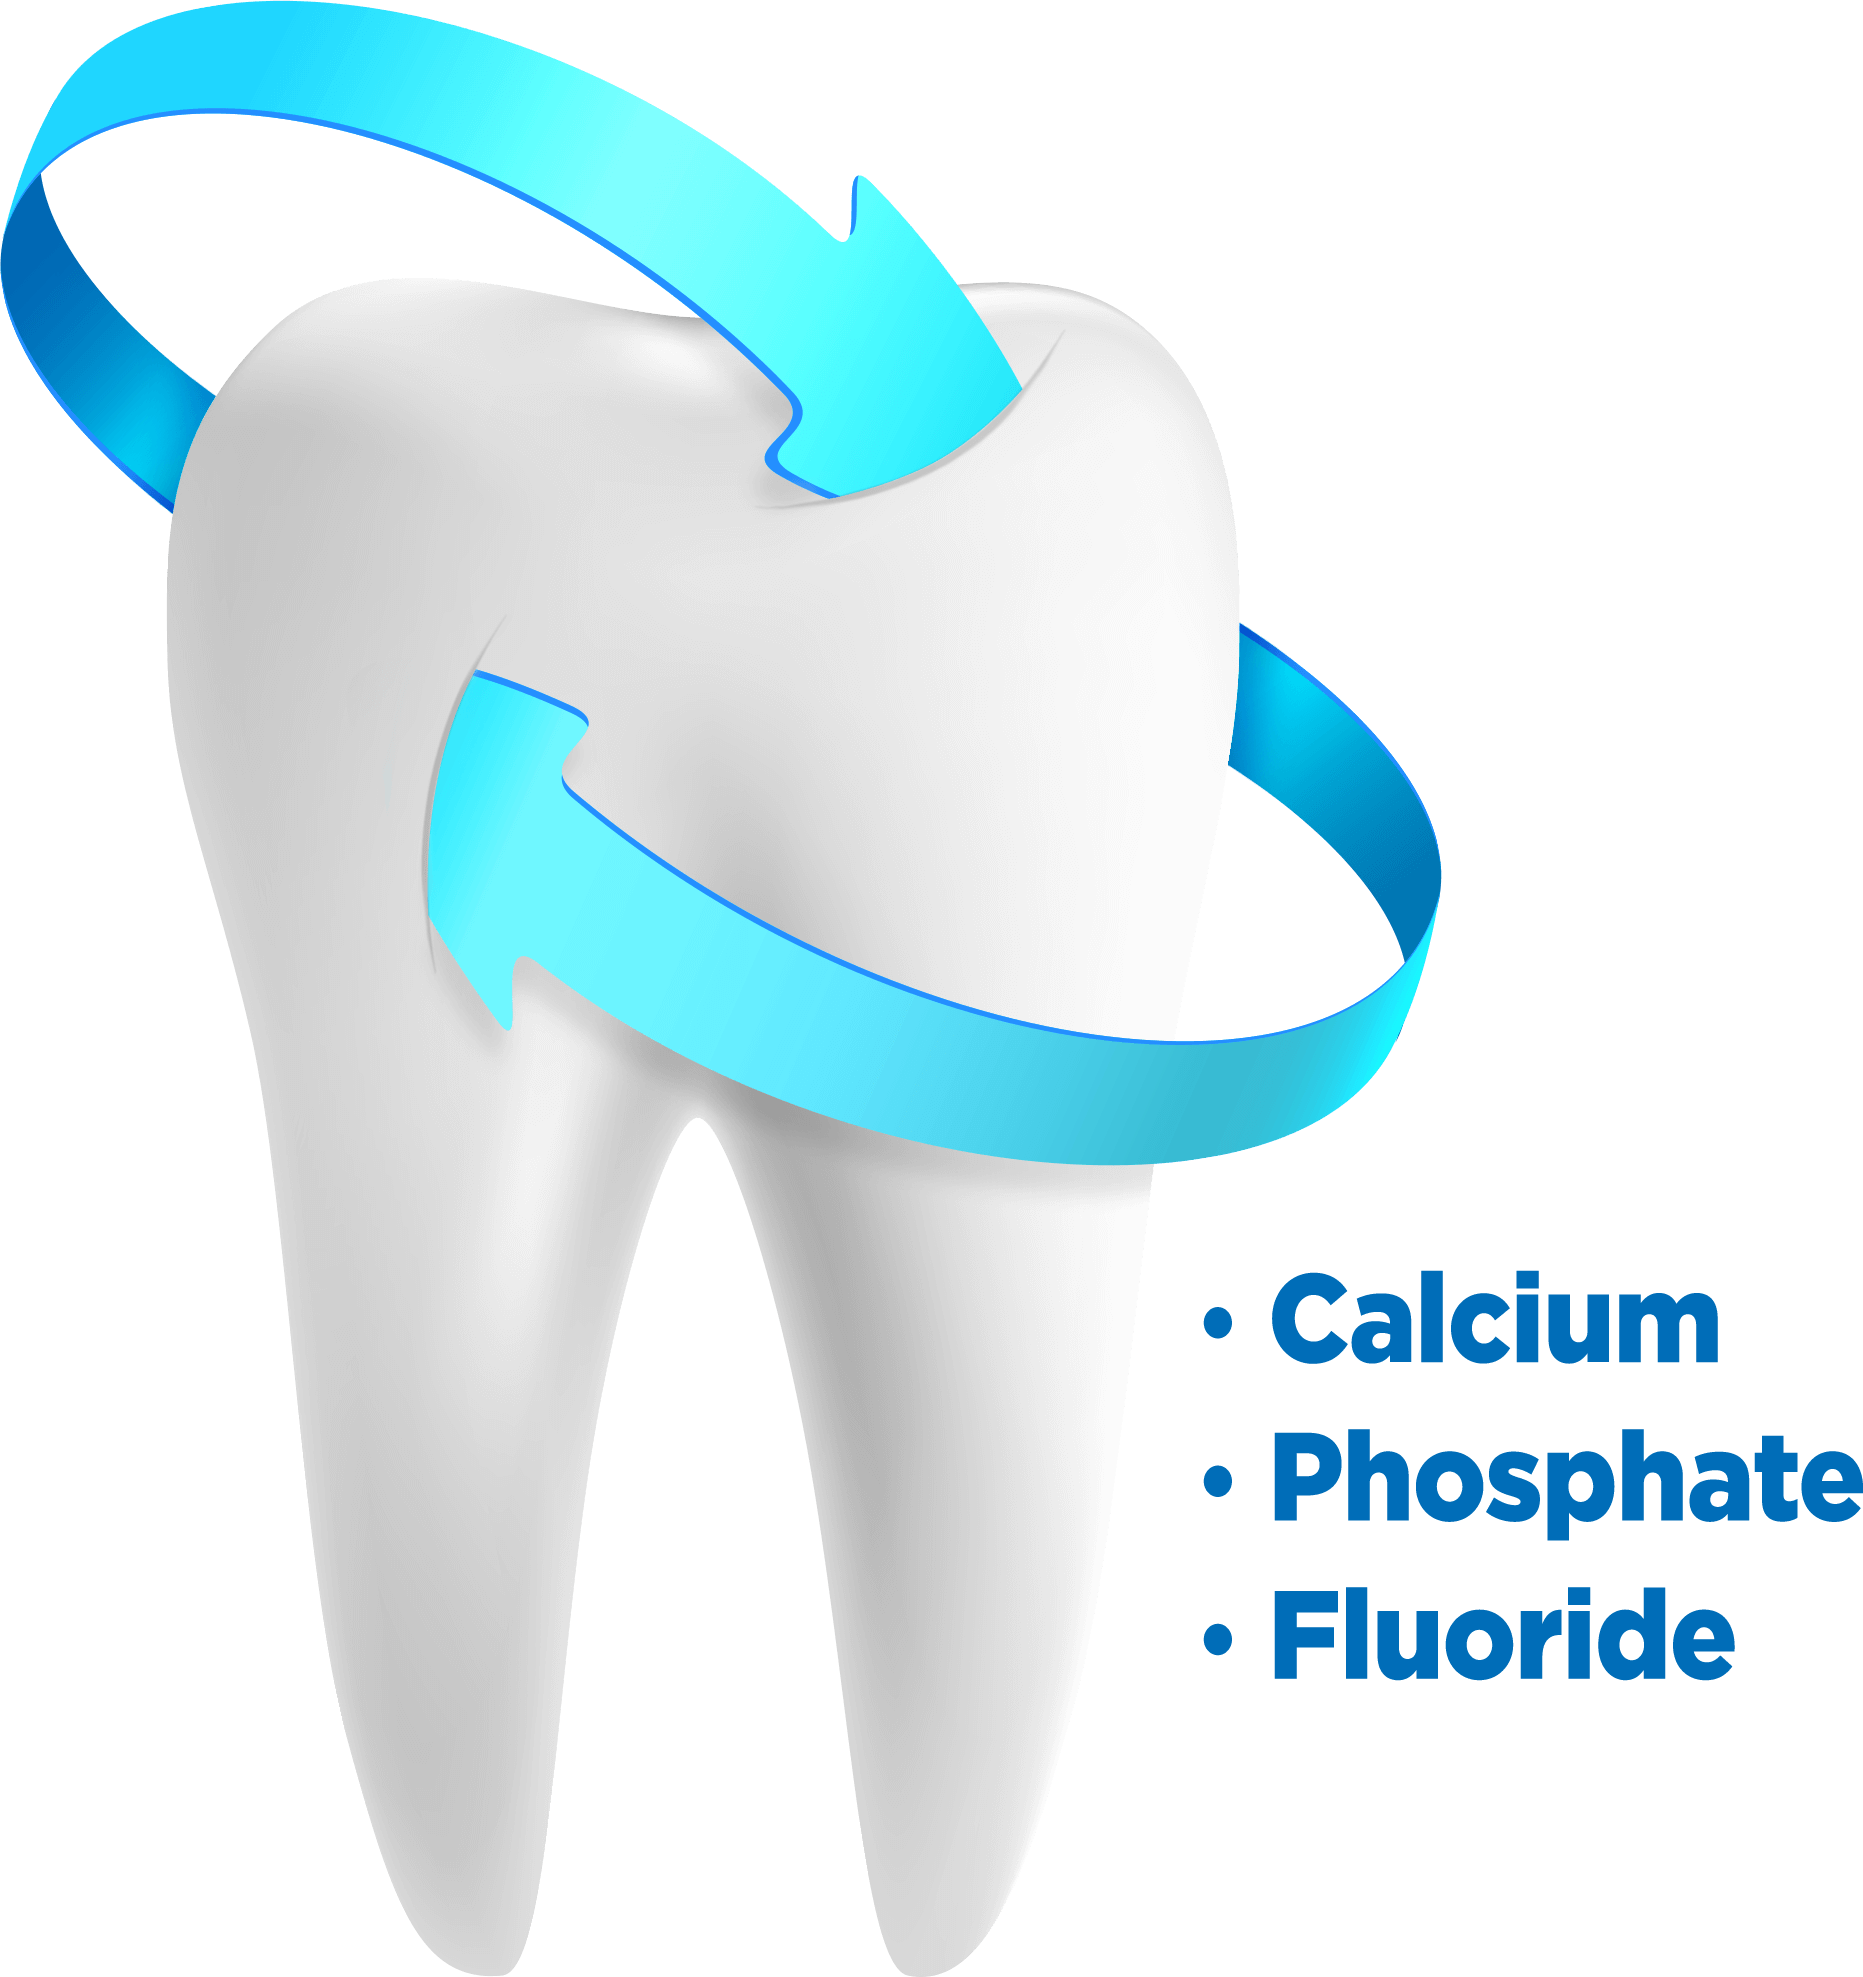 Fluoride works together with calcium and phosphate in saliva to prevent dental caries.